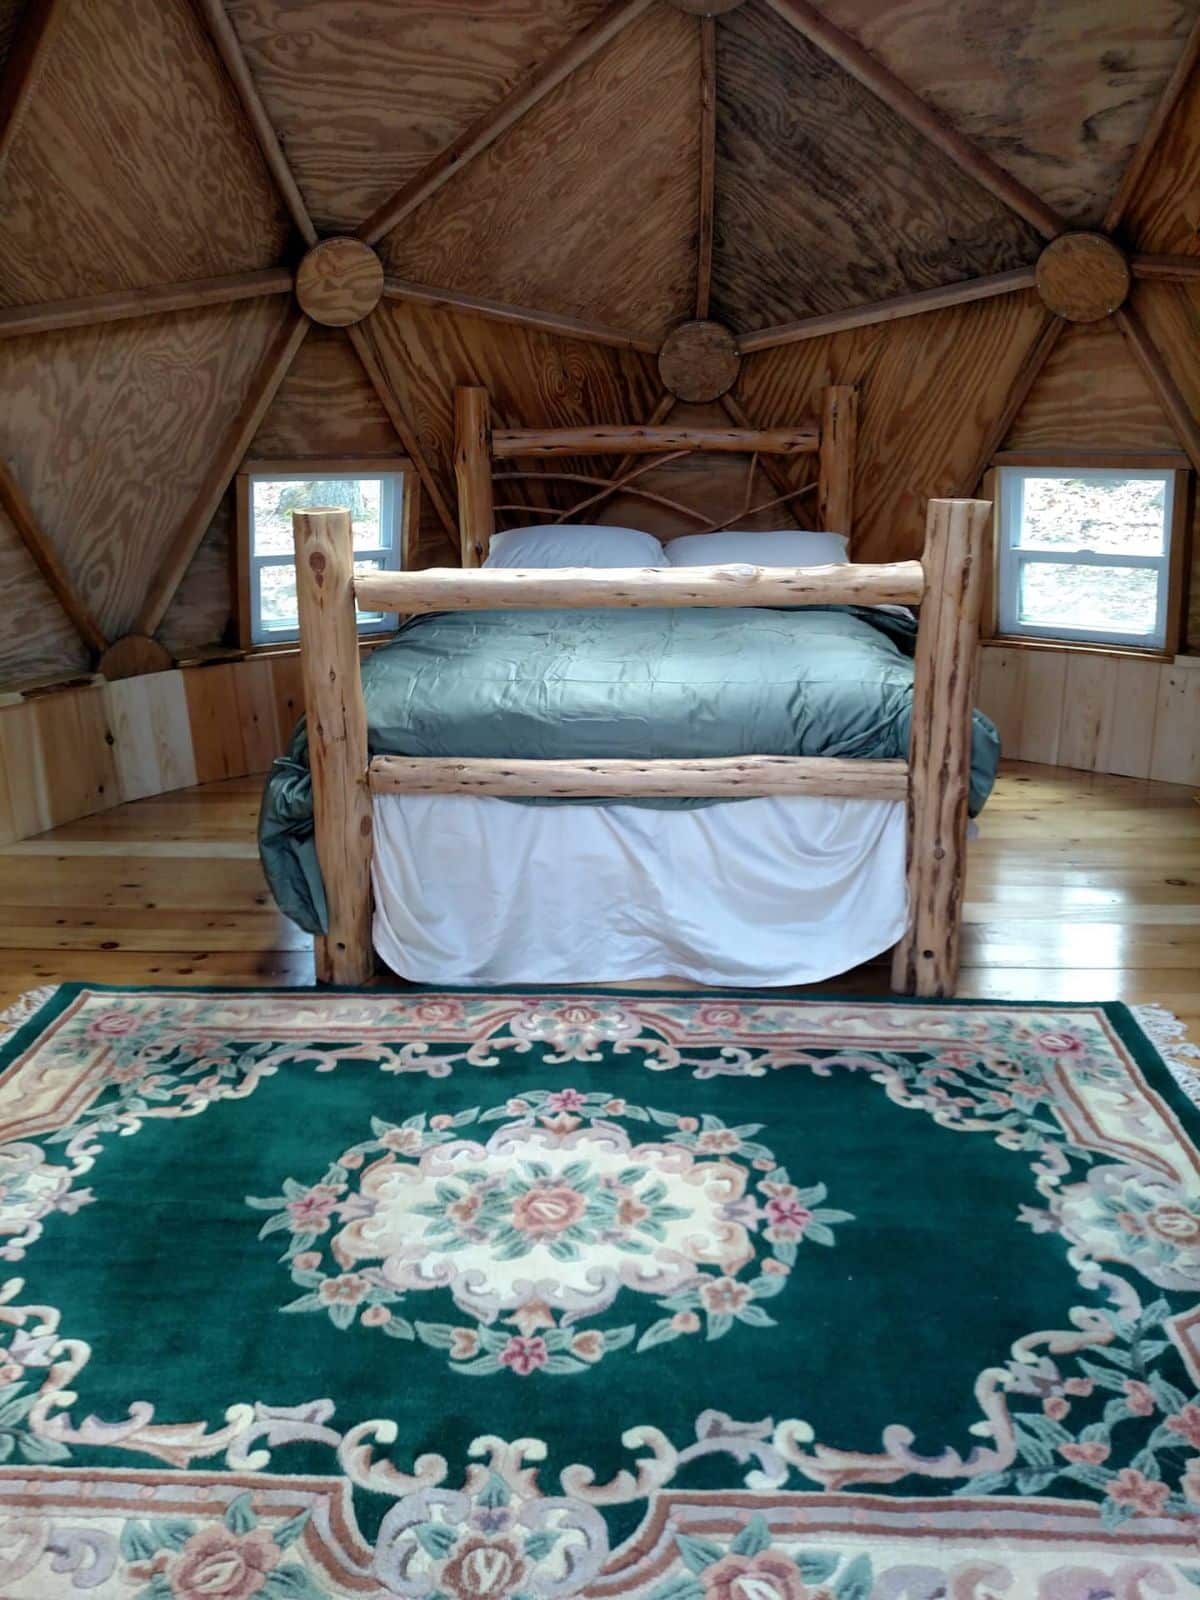 green floral rug in front of wood bed inside wood dome